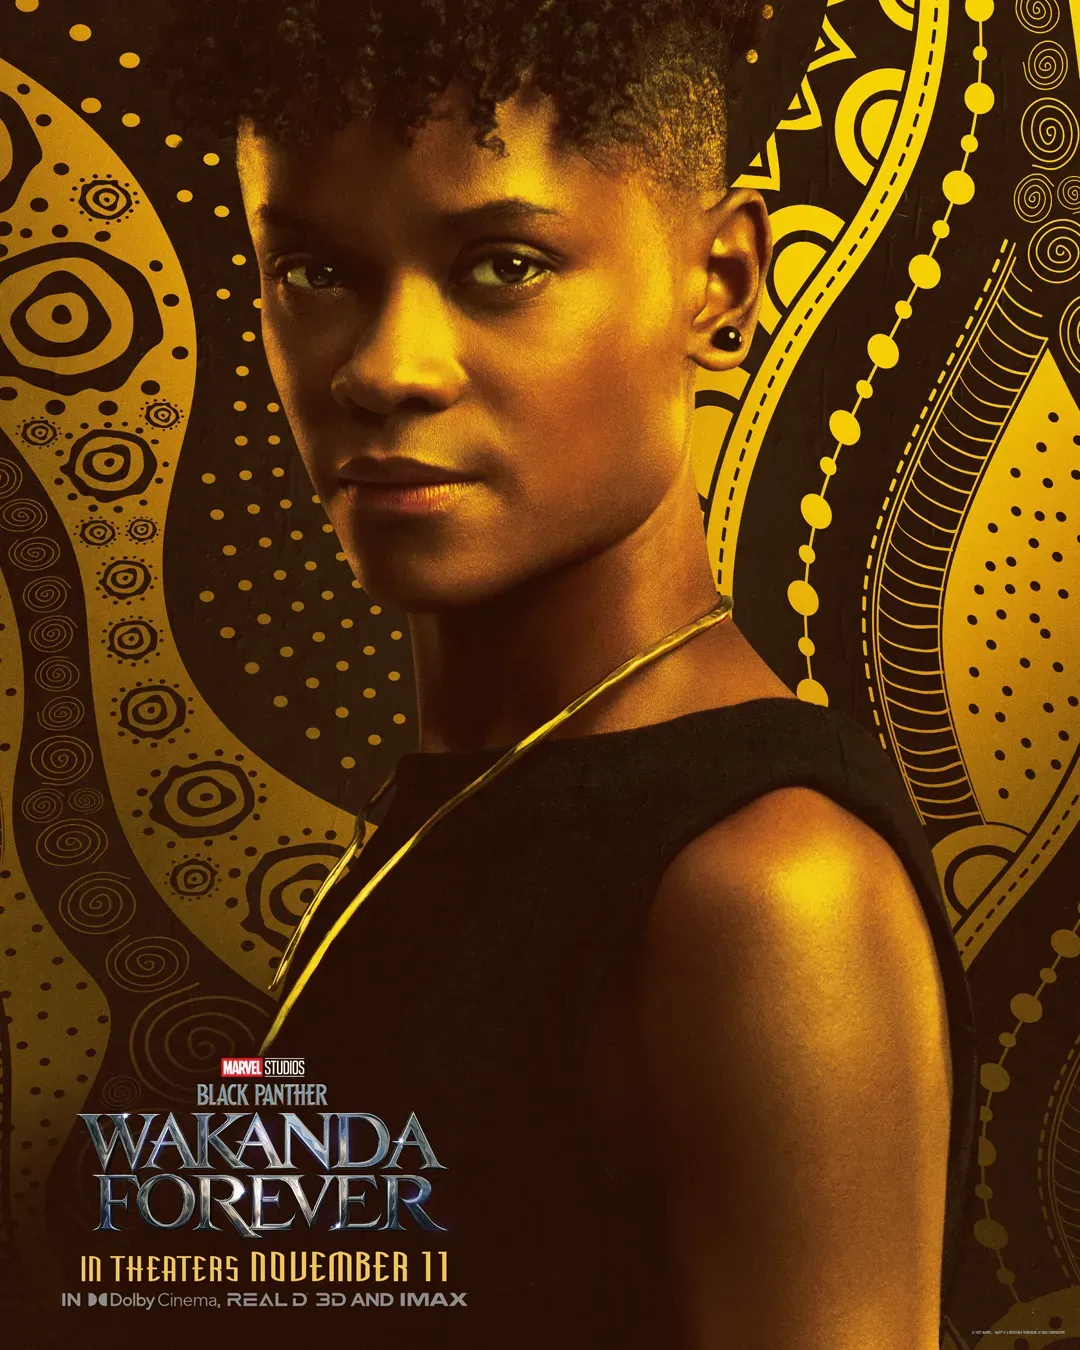 "Black Panther : Wakanda Forever" Releases New Trailer 'Long Live Wakanda' and Character Posters | FMV6